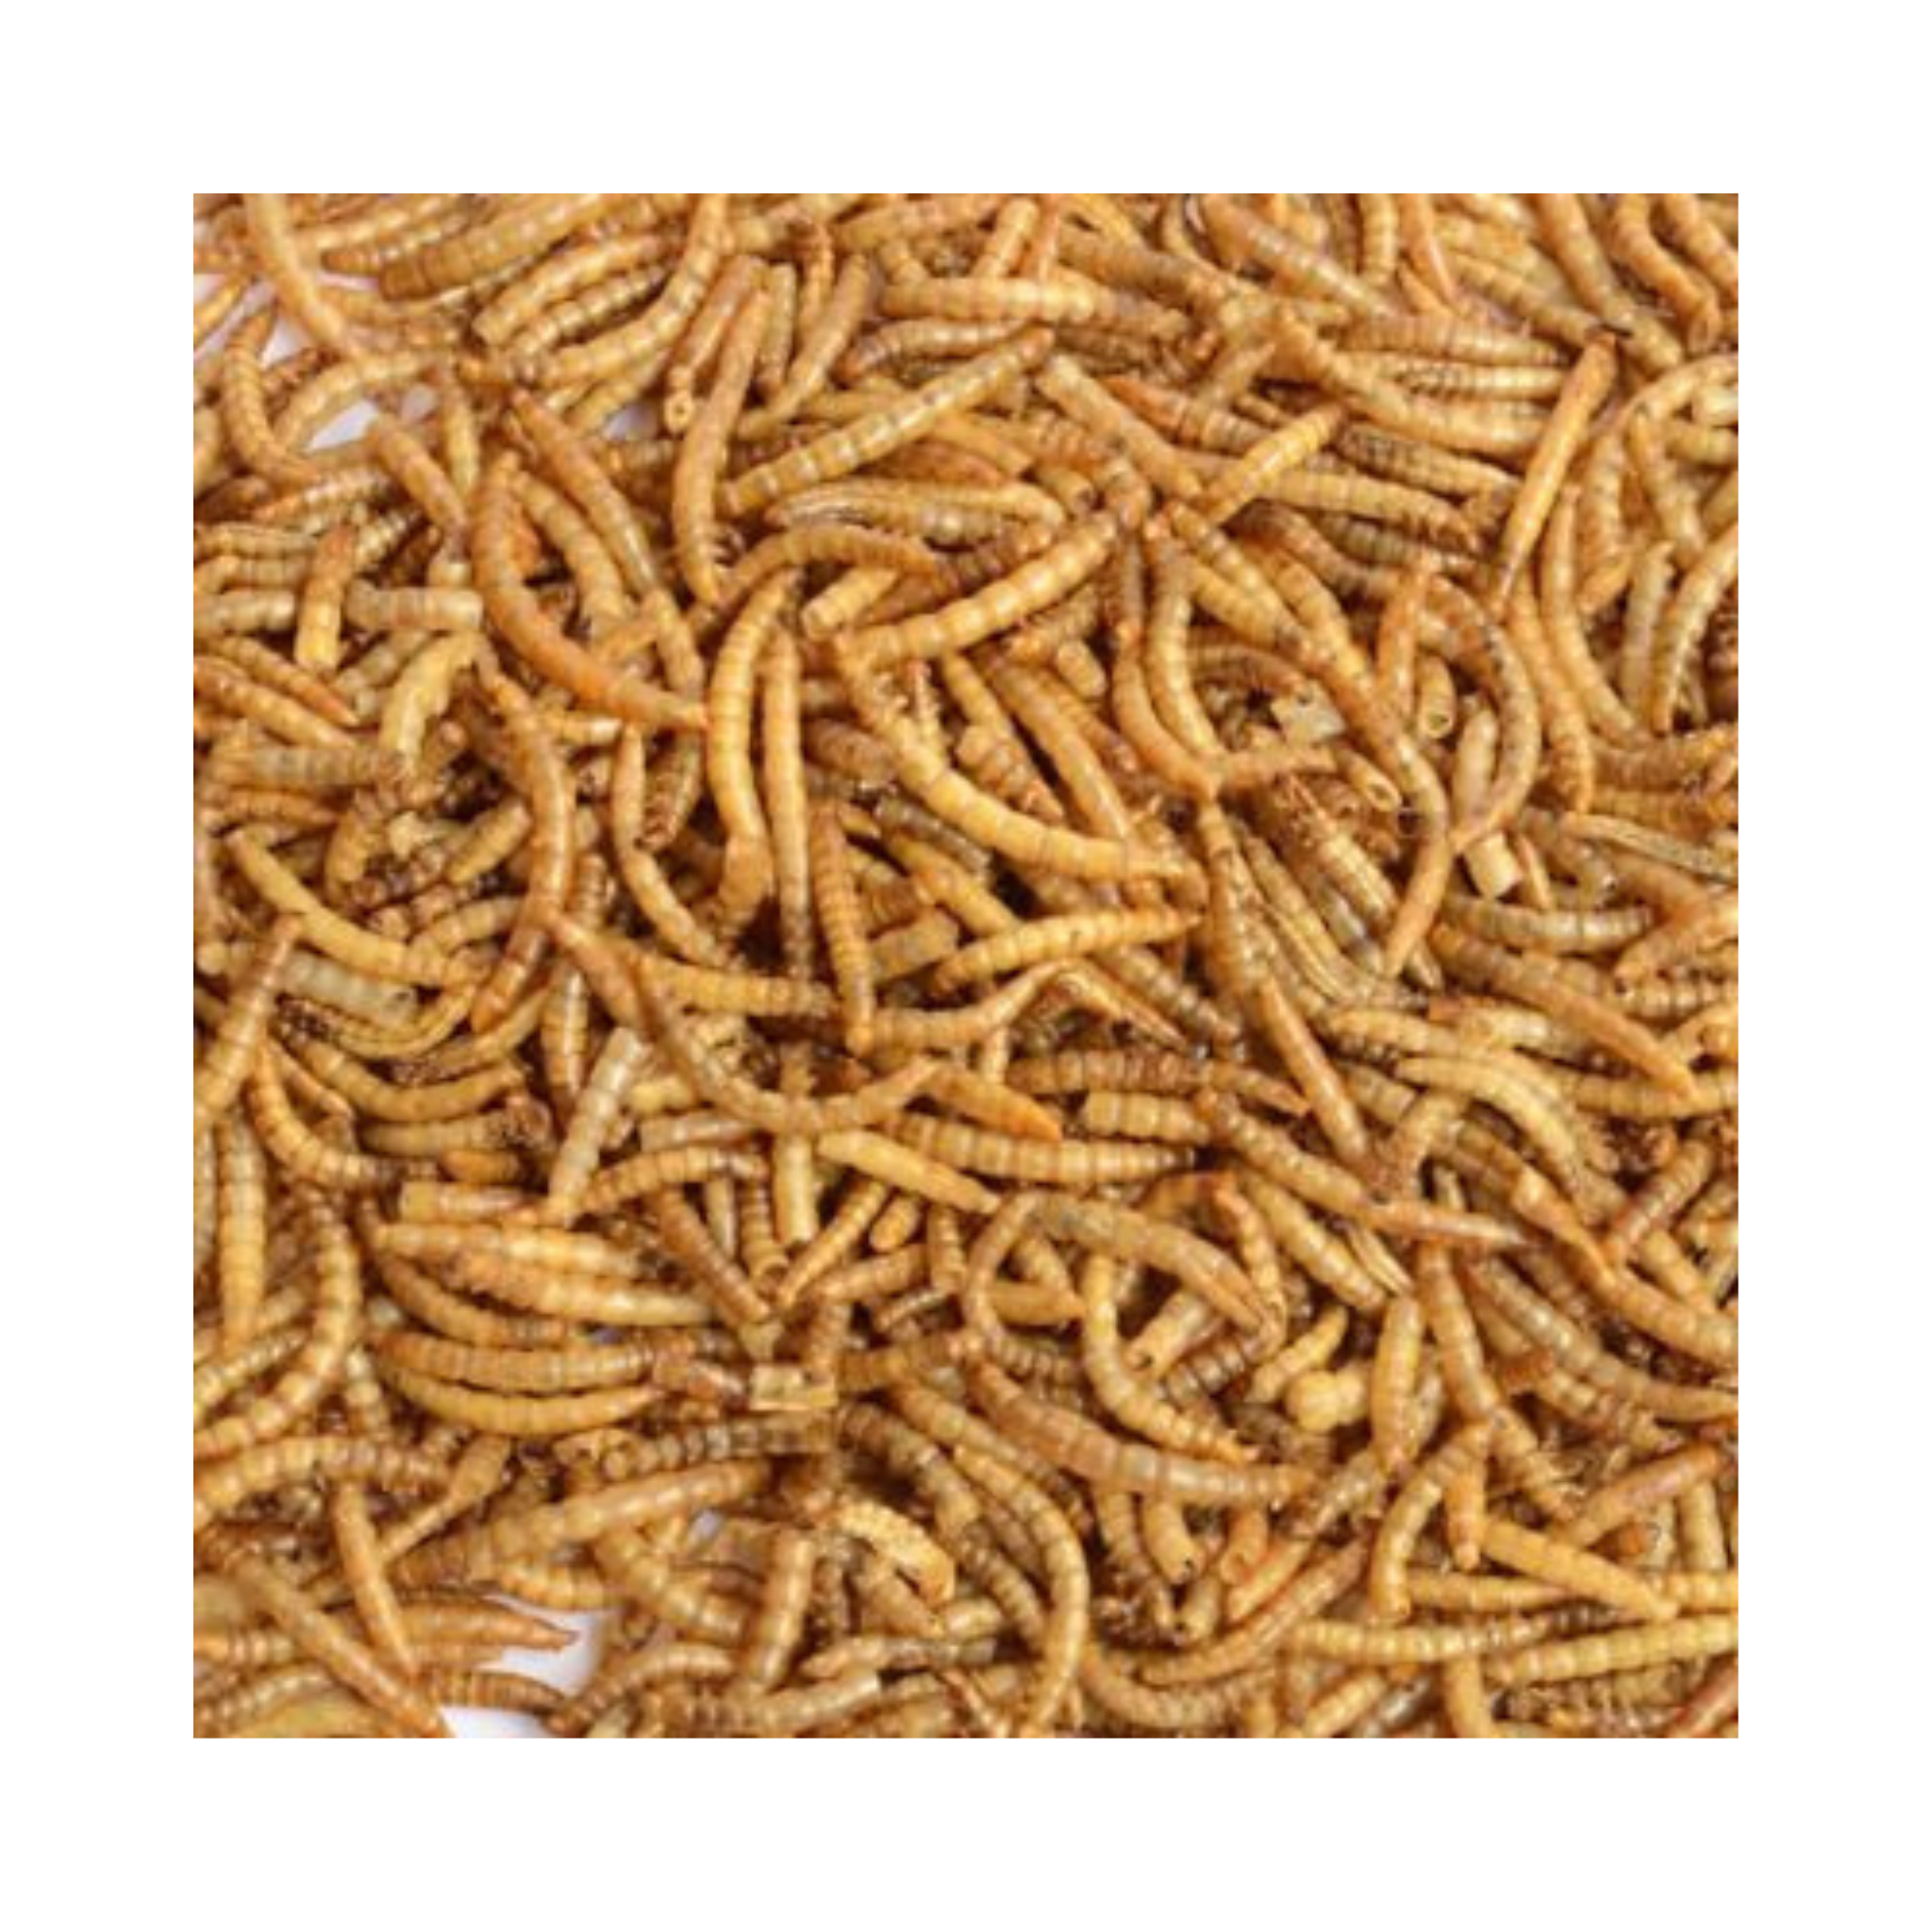 Dried Mealworms Treats